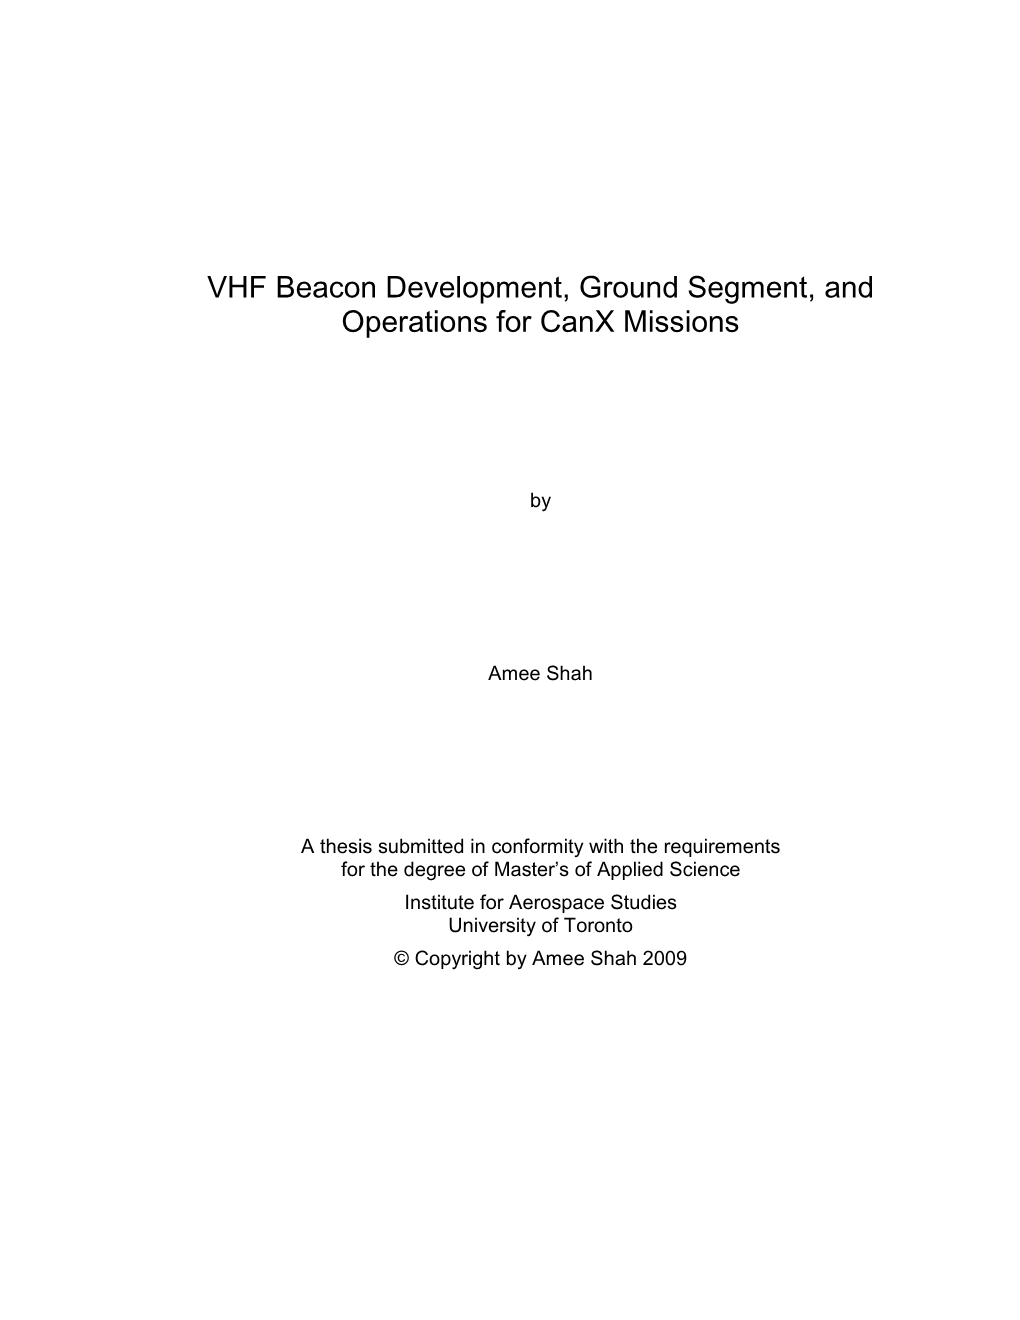 VHF Beacon Development, Ground Segment, and Operations for Canx Missions